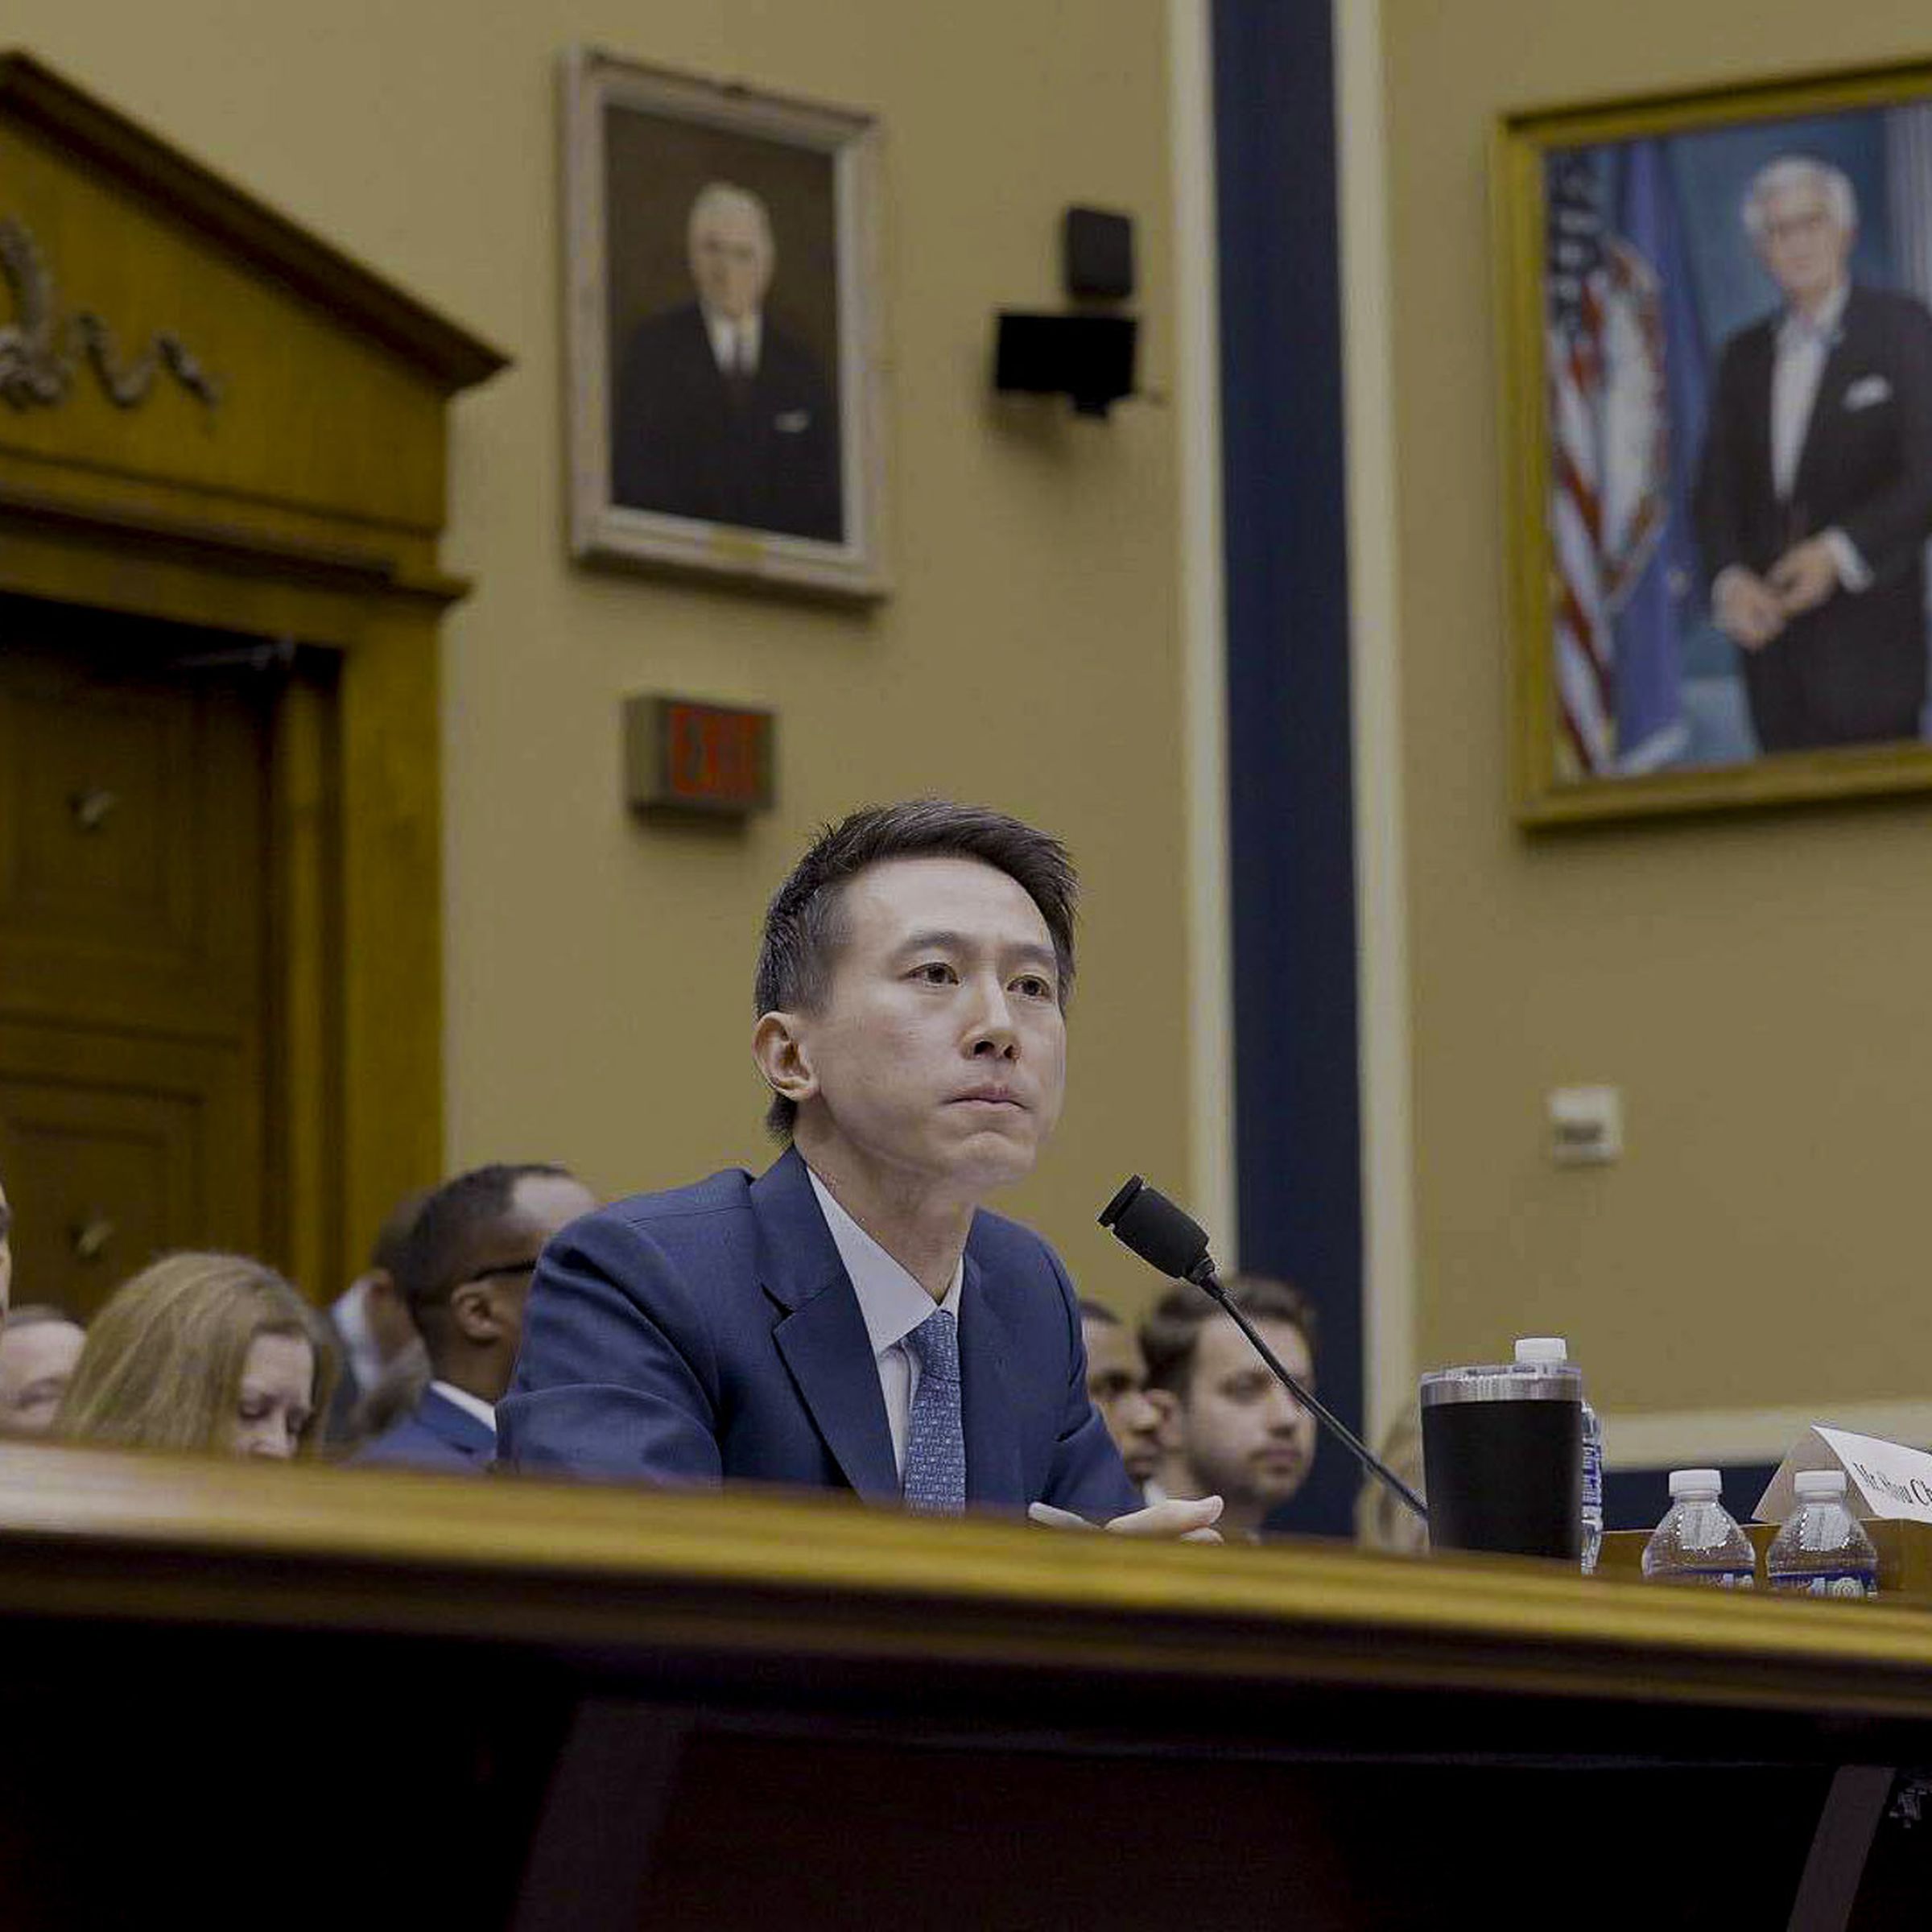 Shou Zi Chew is seated for a hearing. Portraits of American political figures hang on the wall behind him.